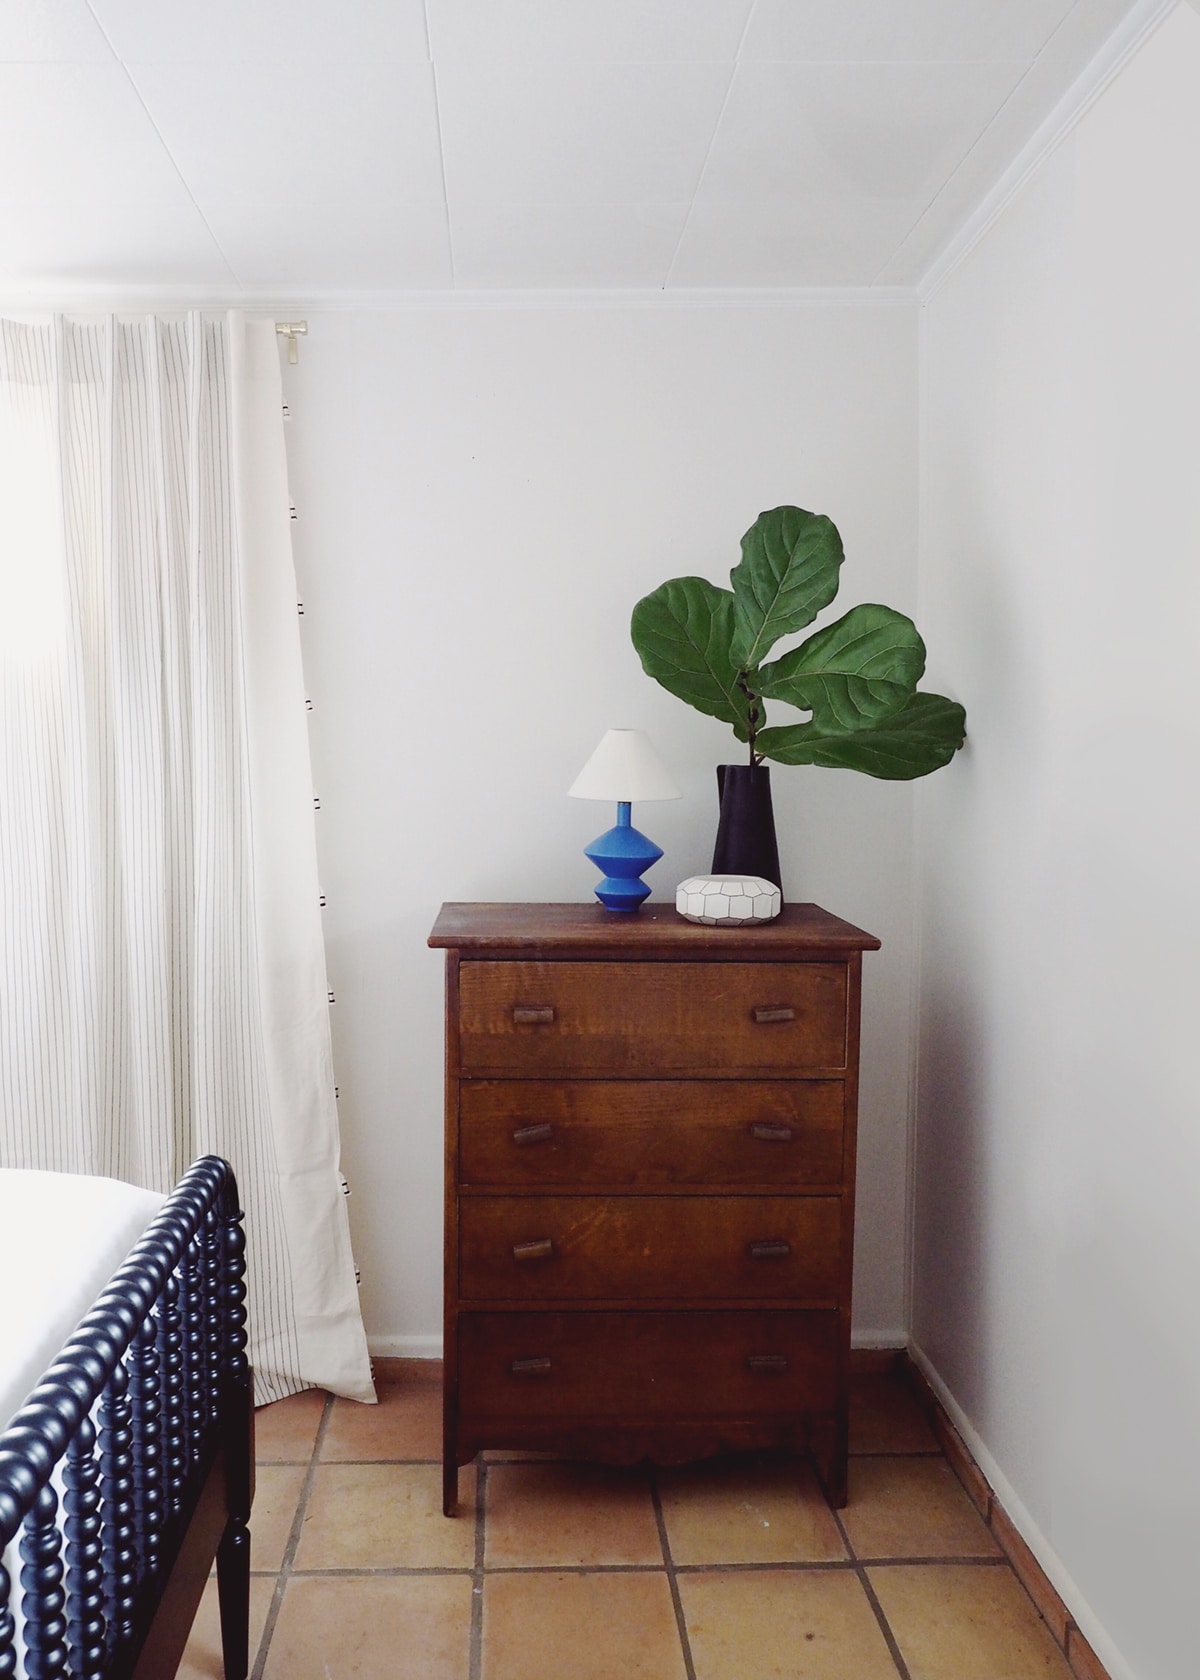 basement bedroom transformation into a tropical escape | guest room makeover on coco kelley